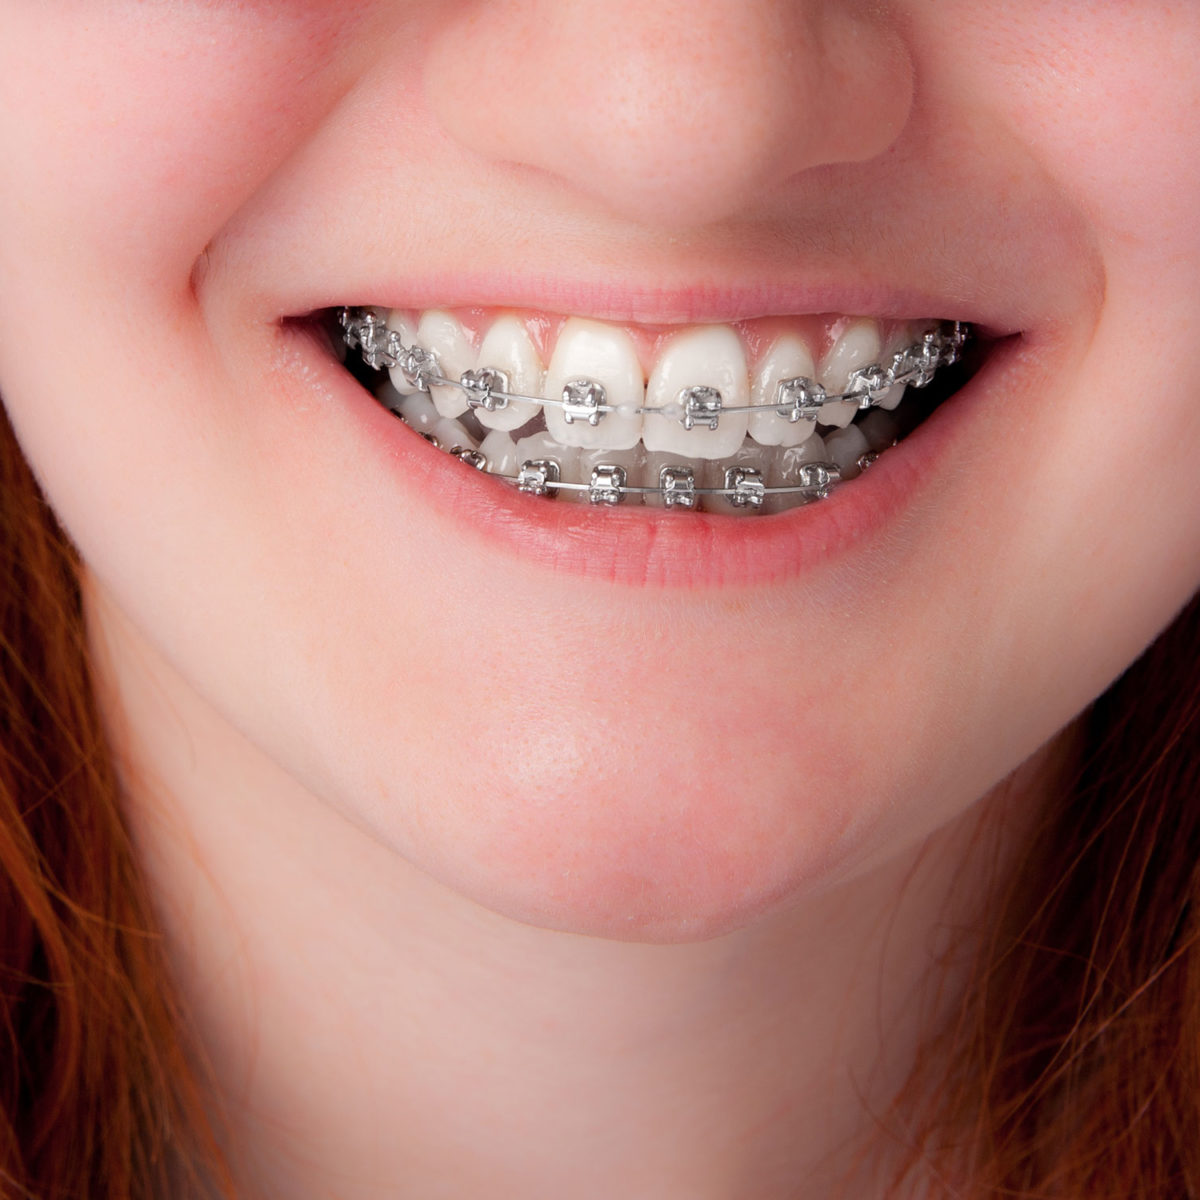 Dental Braces And Pediatric Dentistry: Everything You Need 